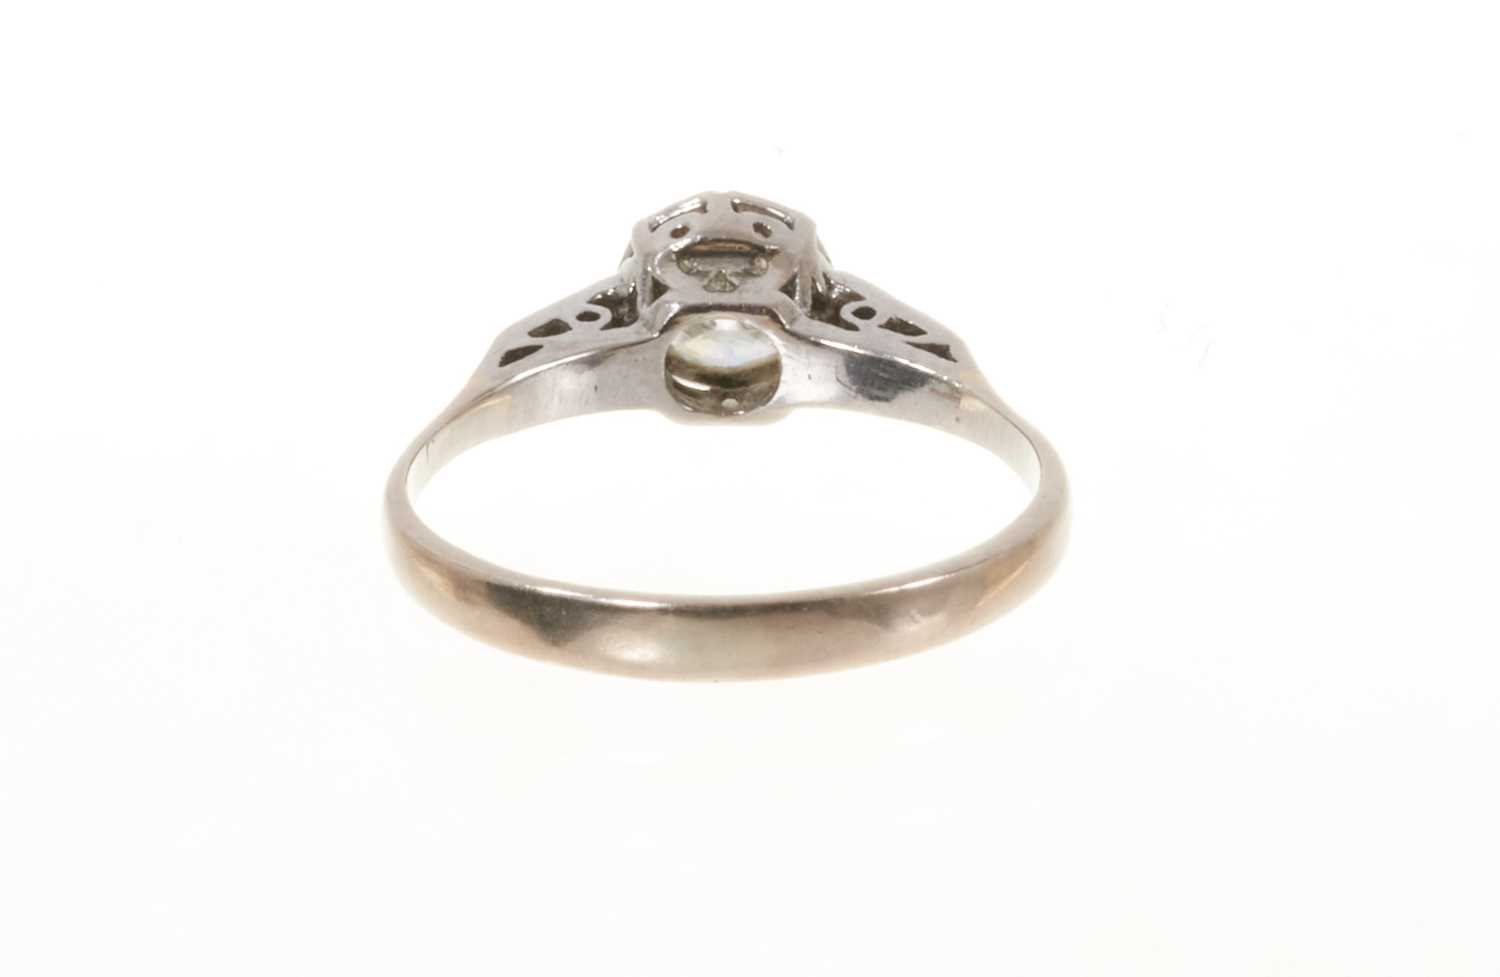 Diamond single stone ring with a round brilliant cut diamond estimated to weigh approximately 0.50ct - Image 3 of 4